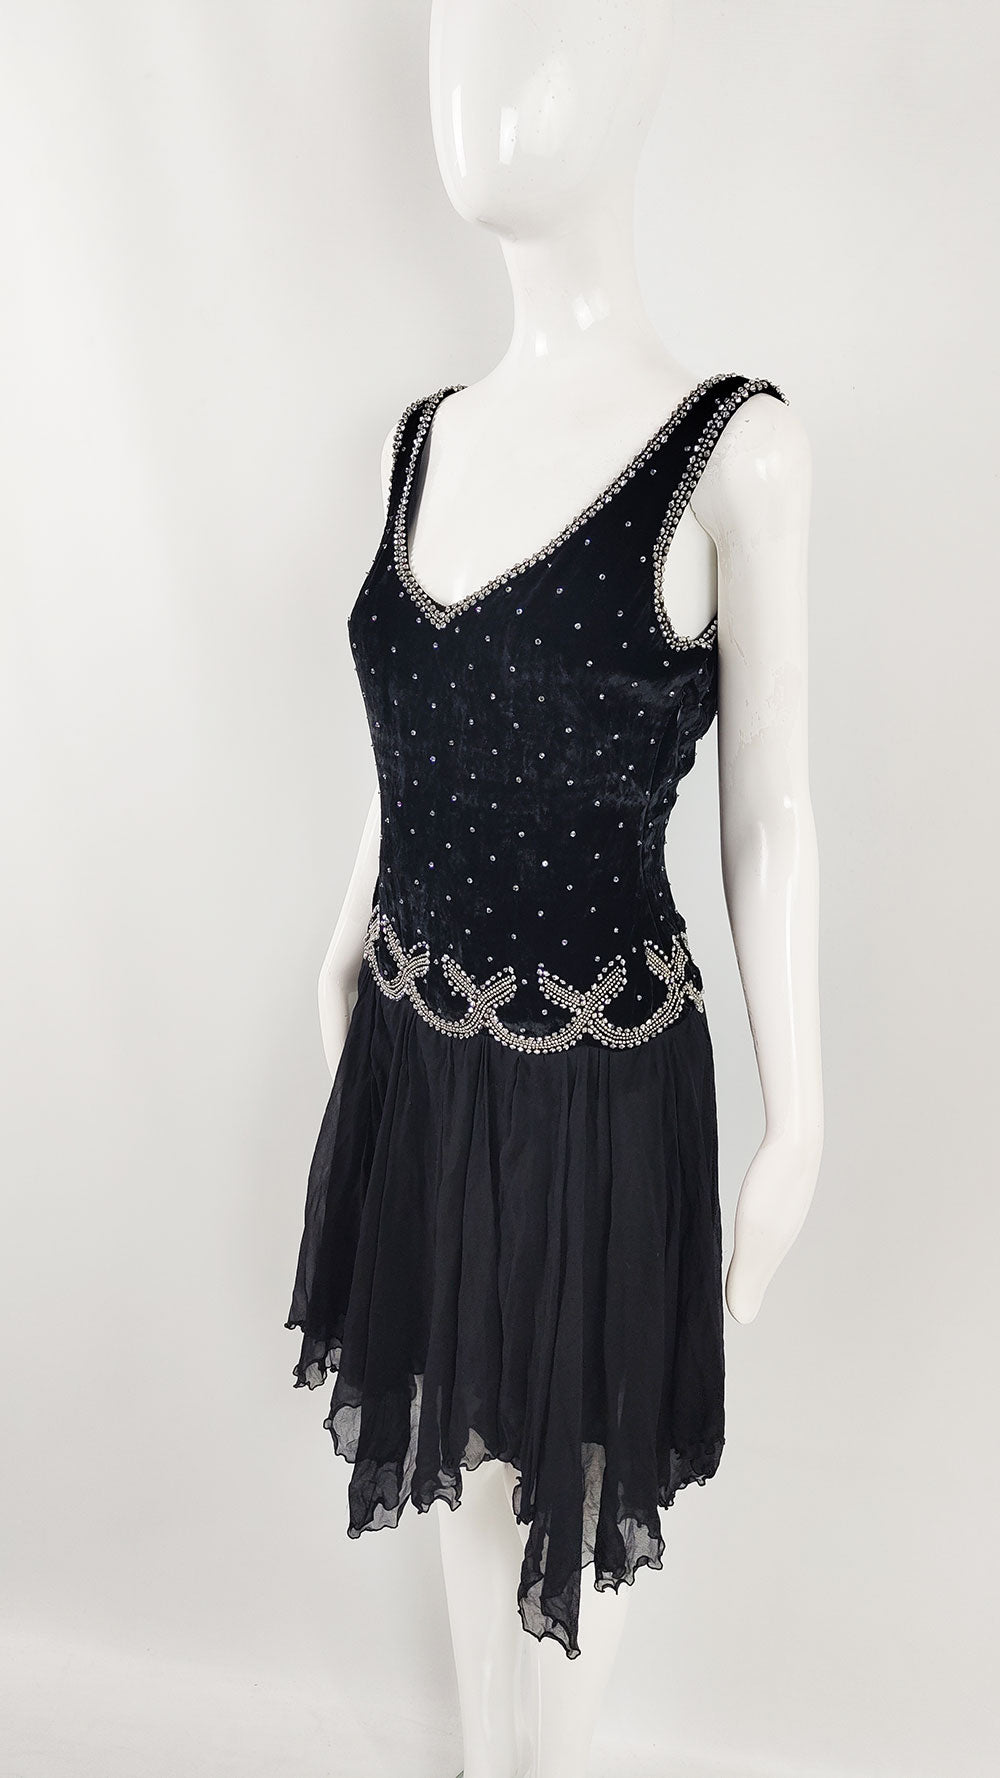 An early 2000s sleeveless vintage party dress  in a black velvet and diaphanous silk chiffon with beading.